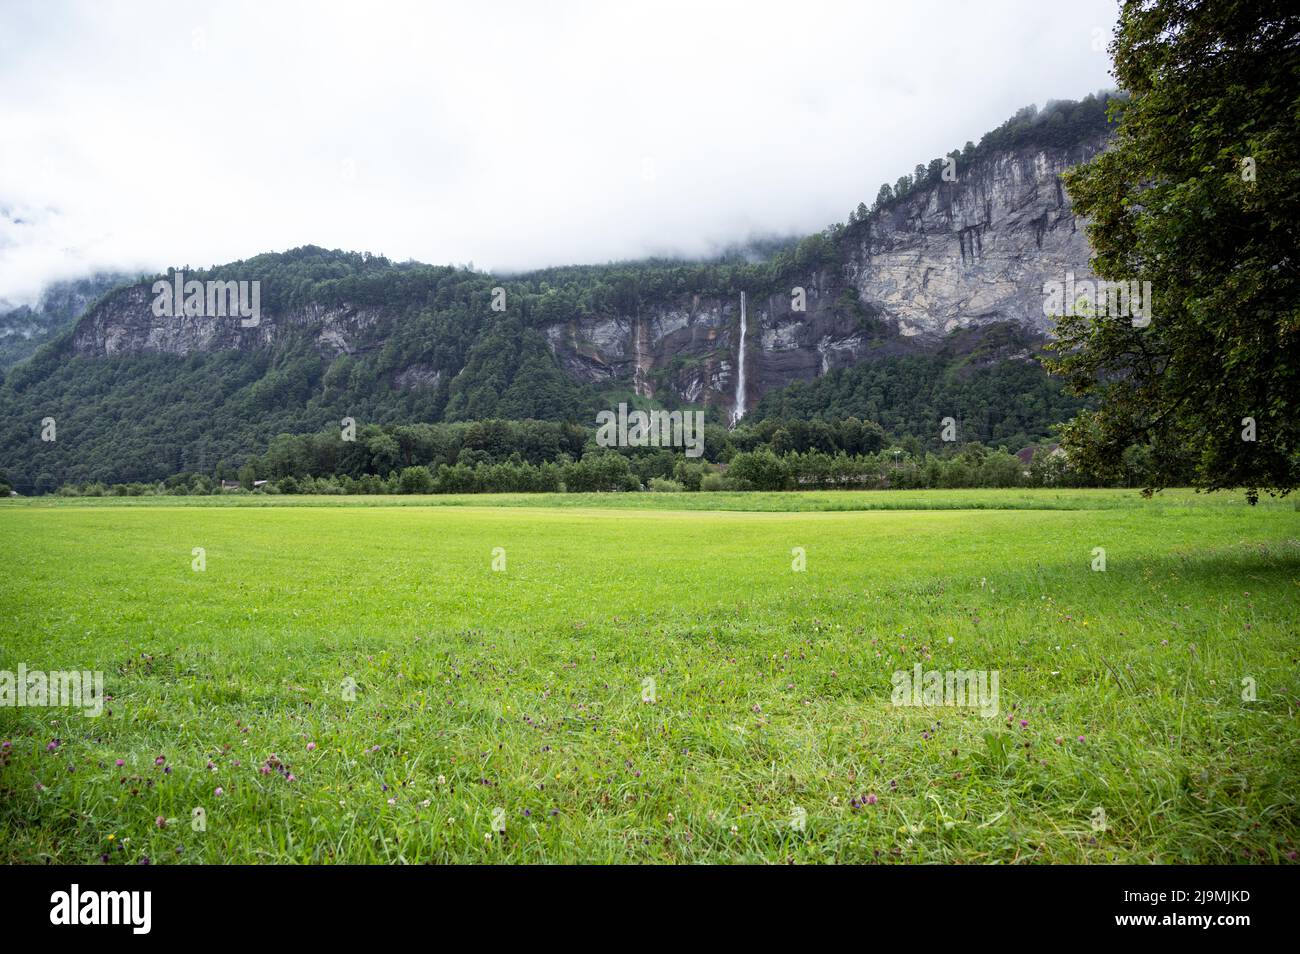 Panoramic view of Reichenbach falls on mountains overlooking the lush green meadows captured from the country side village of Meiringen, Switzerland Stock Photo